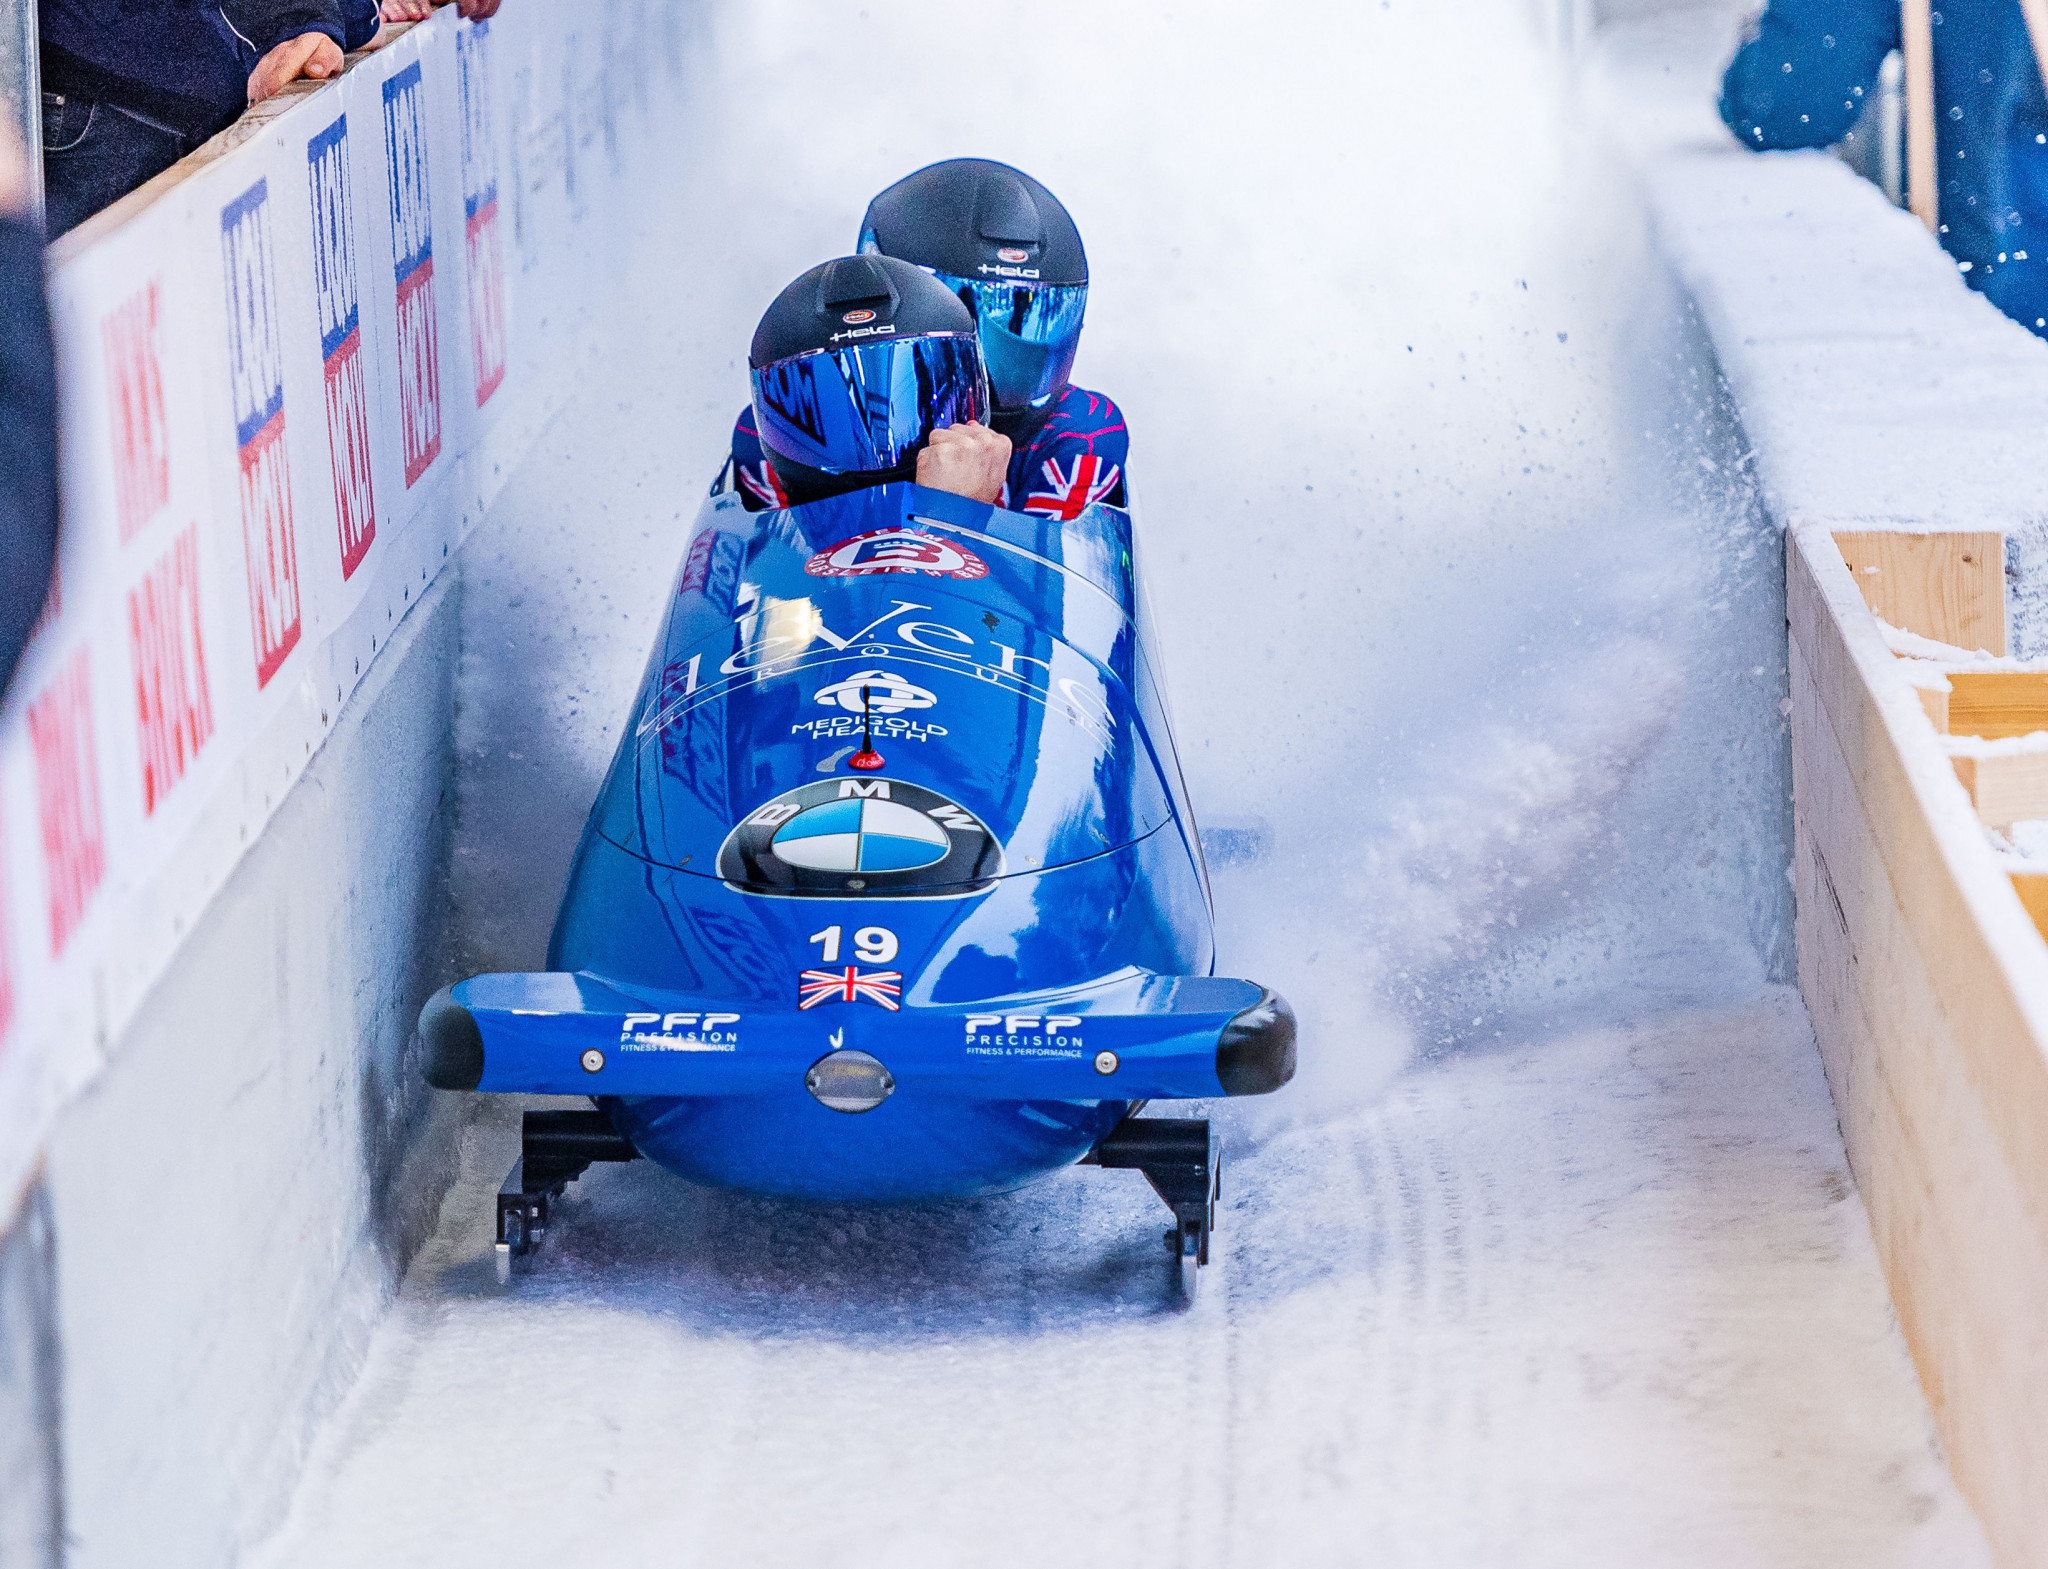 UK Sport has launched an independent investigation into allegations of racism and bullying made against the British Bobsleigh and Skeleton Association ©Getty Images